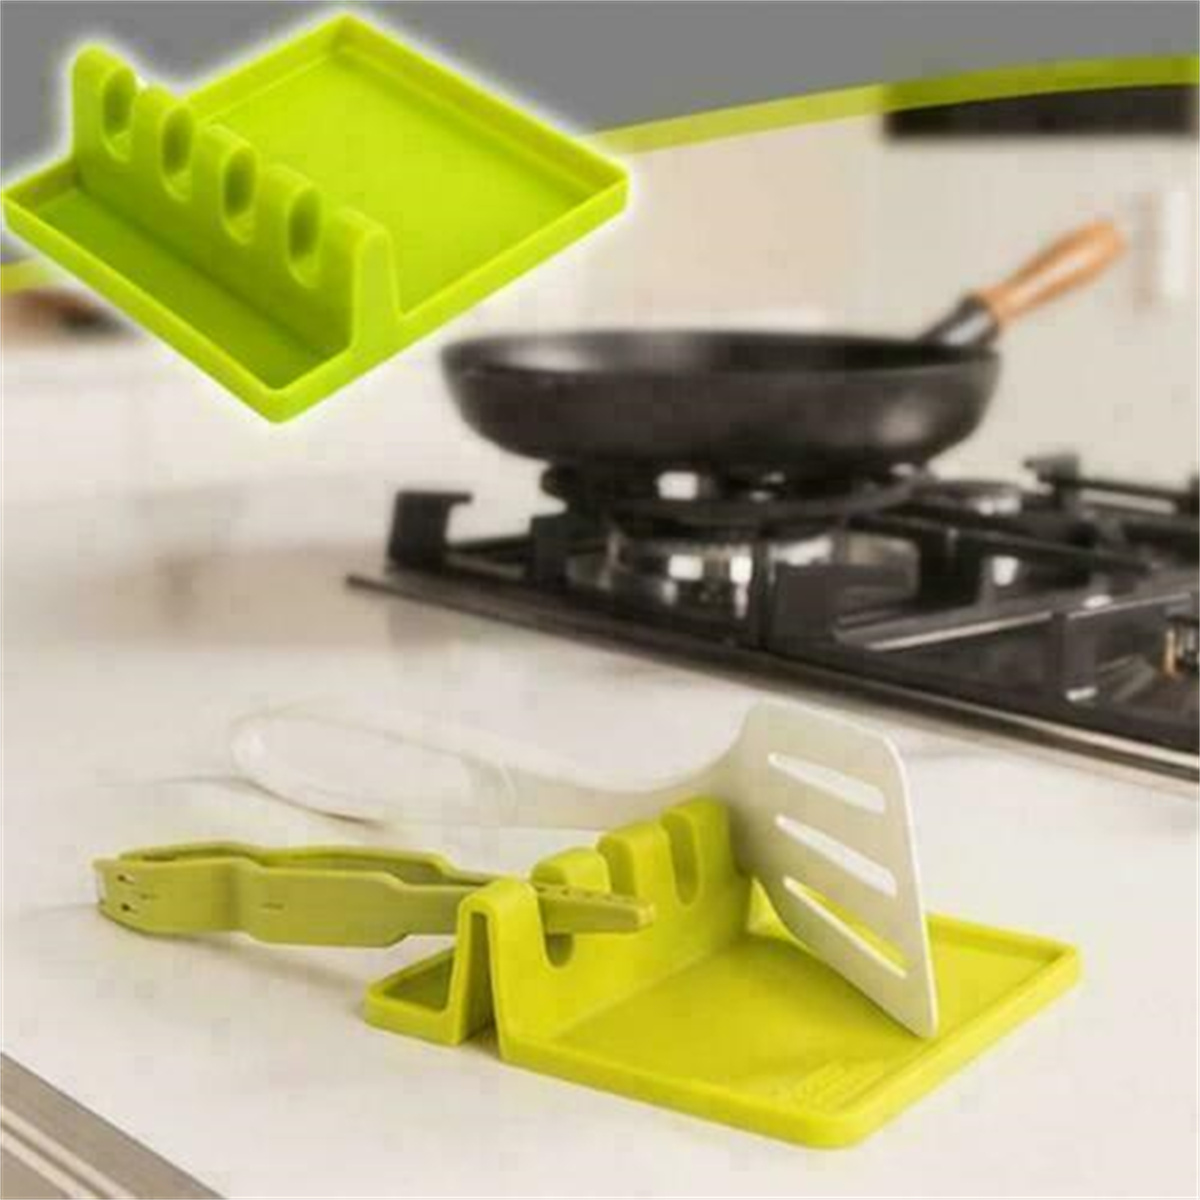 Sunloudy Heat Resistant Silicone Spoon Rest Ladle Utensil Holder Rack Cooking Tool Holder - image 5 of 6